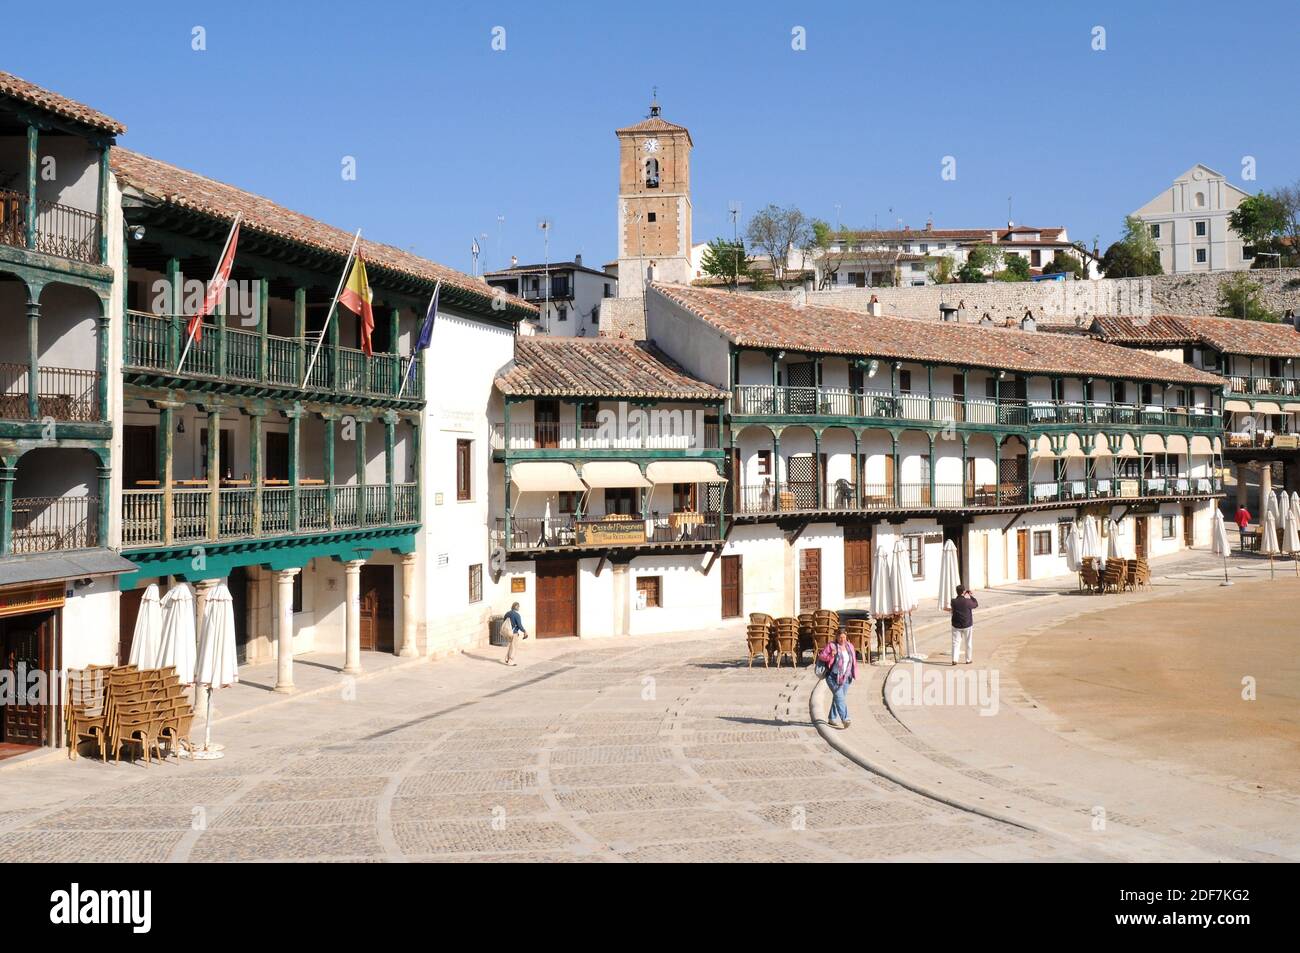 Chinchon, Plaza Mayor (15-17th centuries) and from left to right Clock tower and Lope de Vega theater. Comunidad de Madrid, Spain. Stock Photo